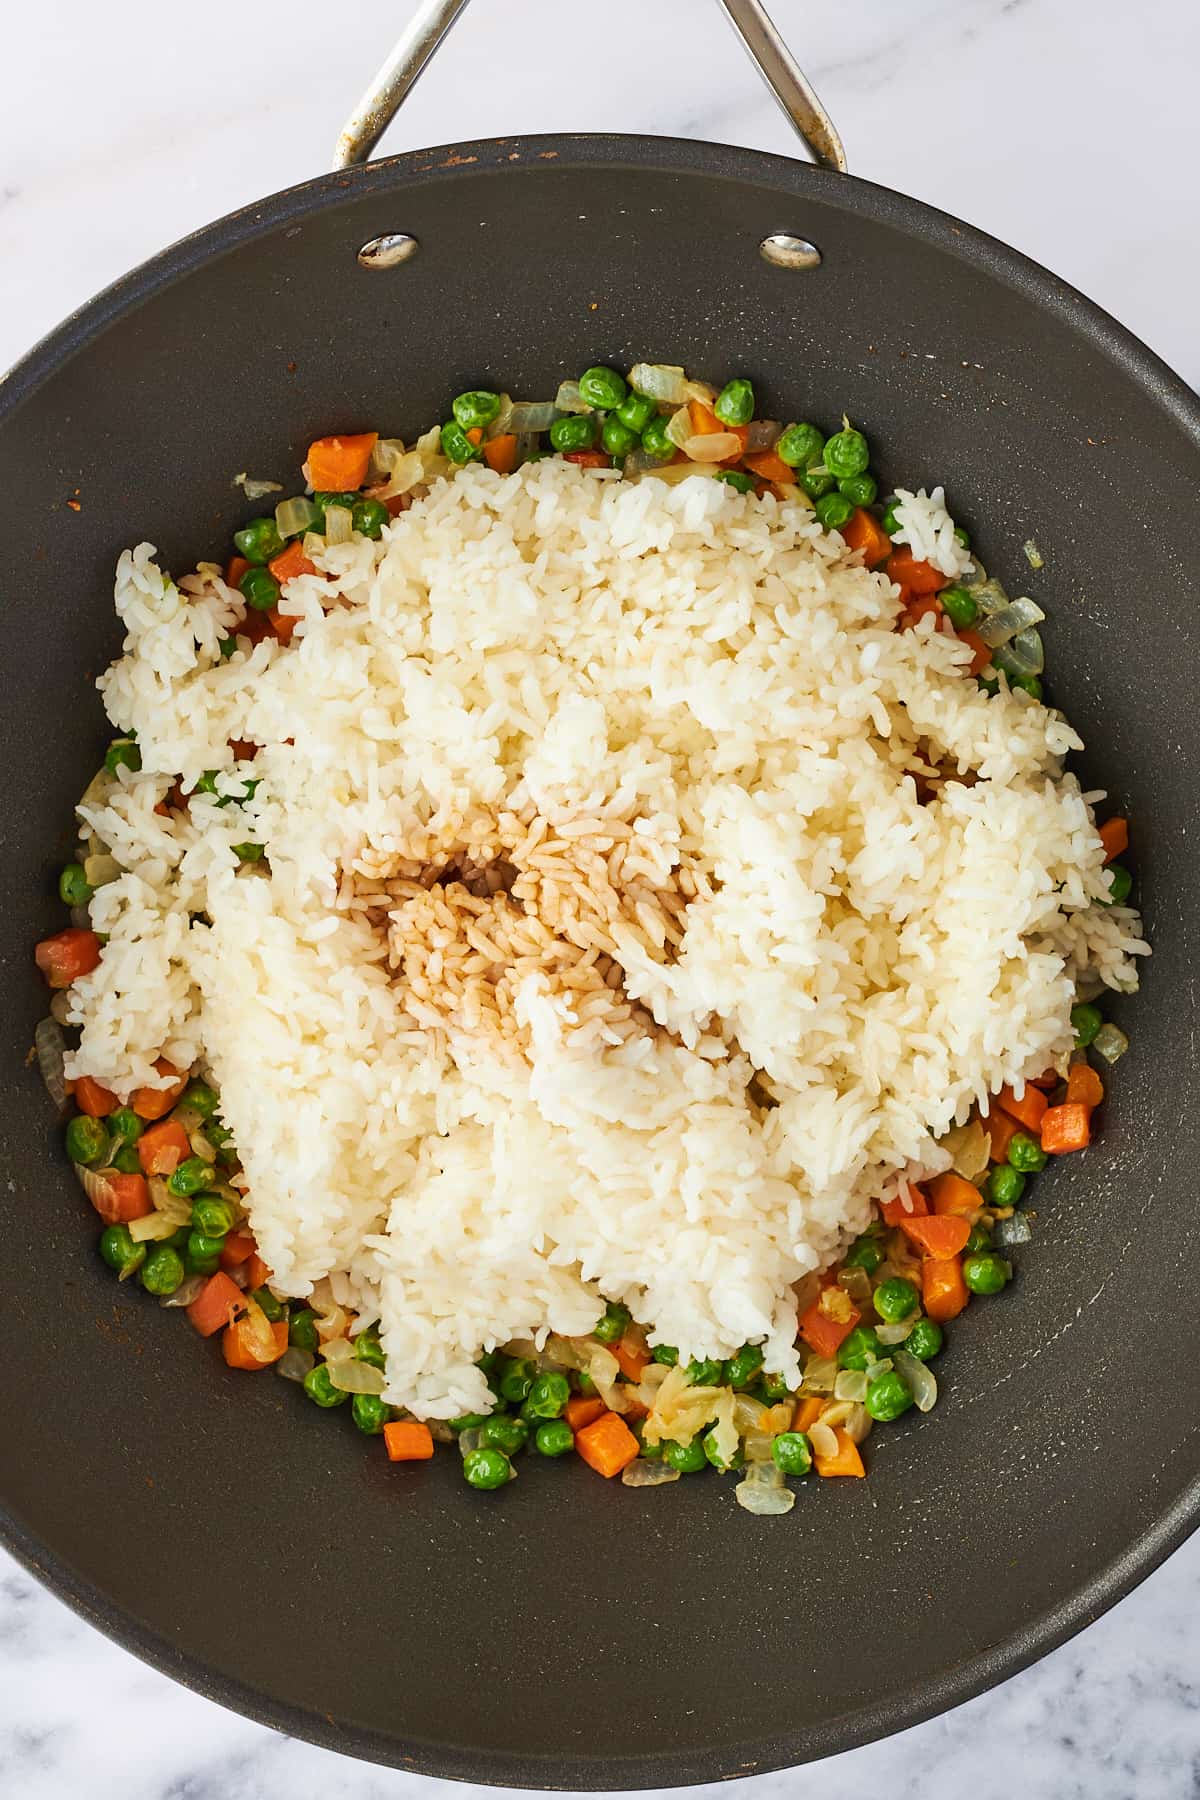 Rice and soy sauce being added to veggies in a wok. 